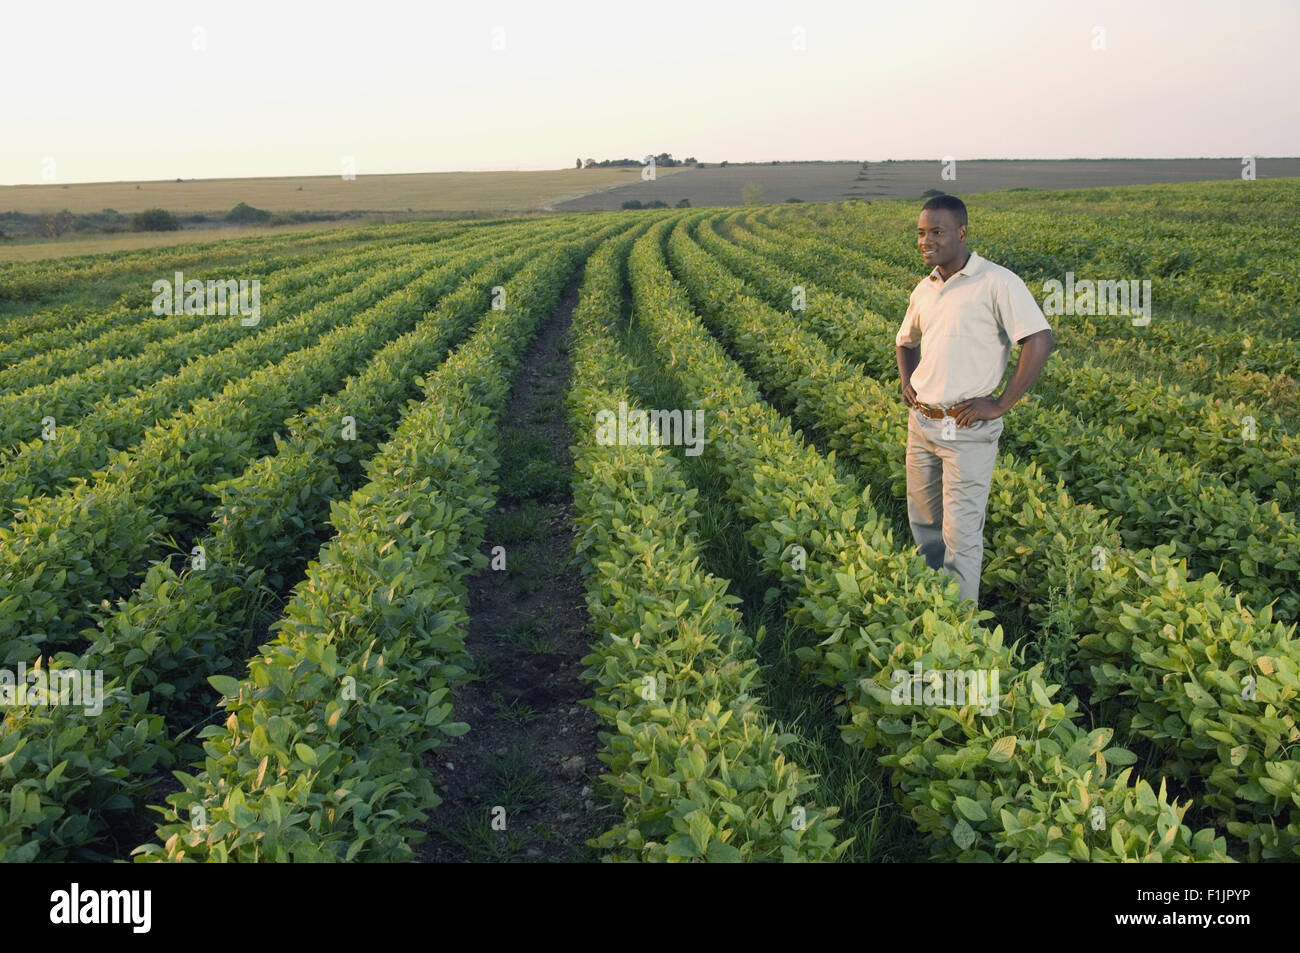 Man standing in vegetable field with hand on hip Stock Photo